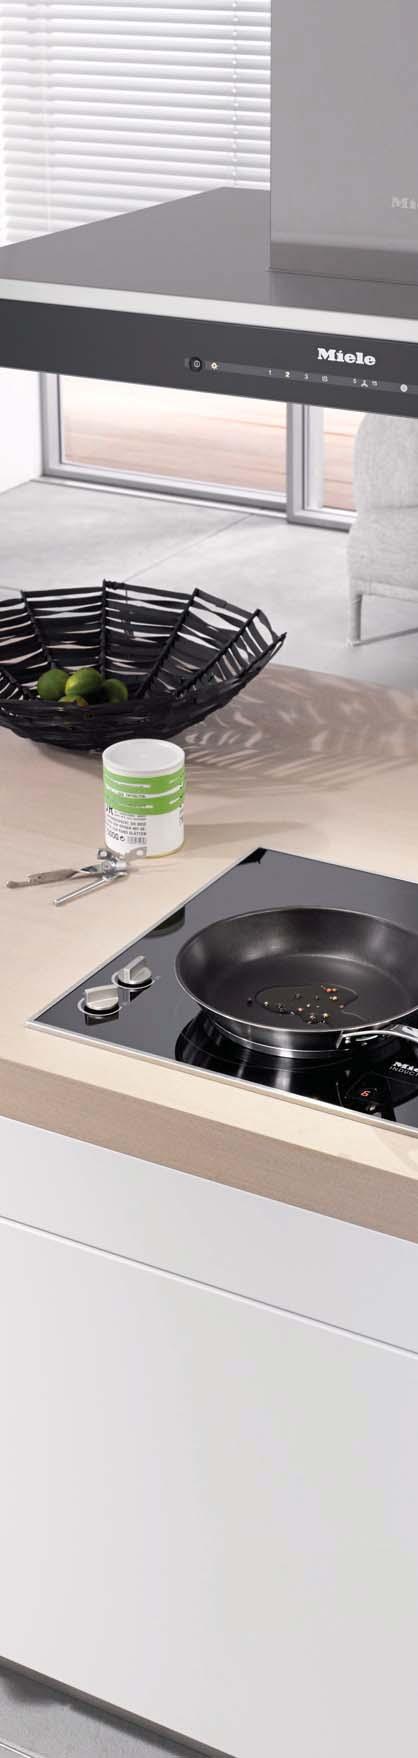 Miele Cooktop Options Combined With An Oven The Miele H2260 E + KM6002 is a 24" electric cooktop and